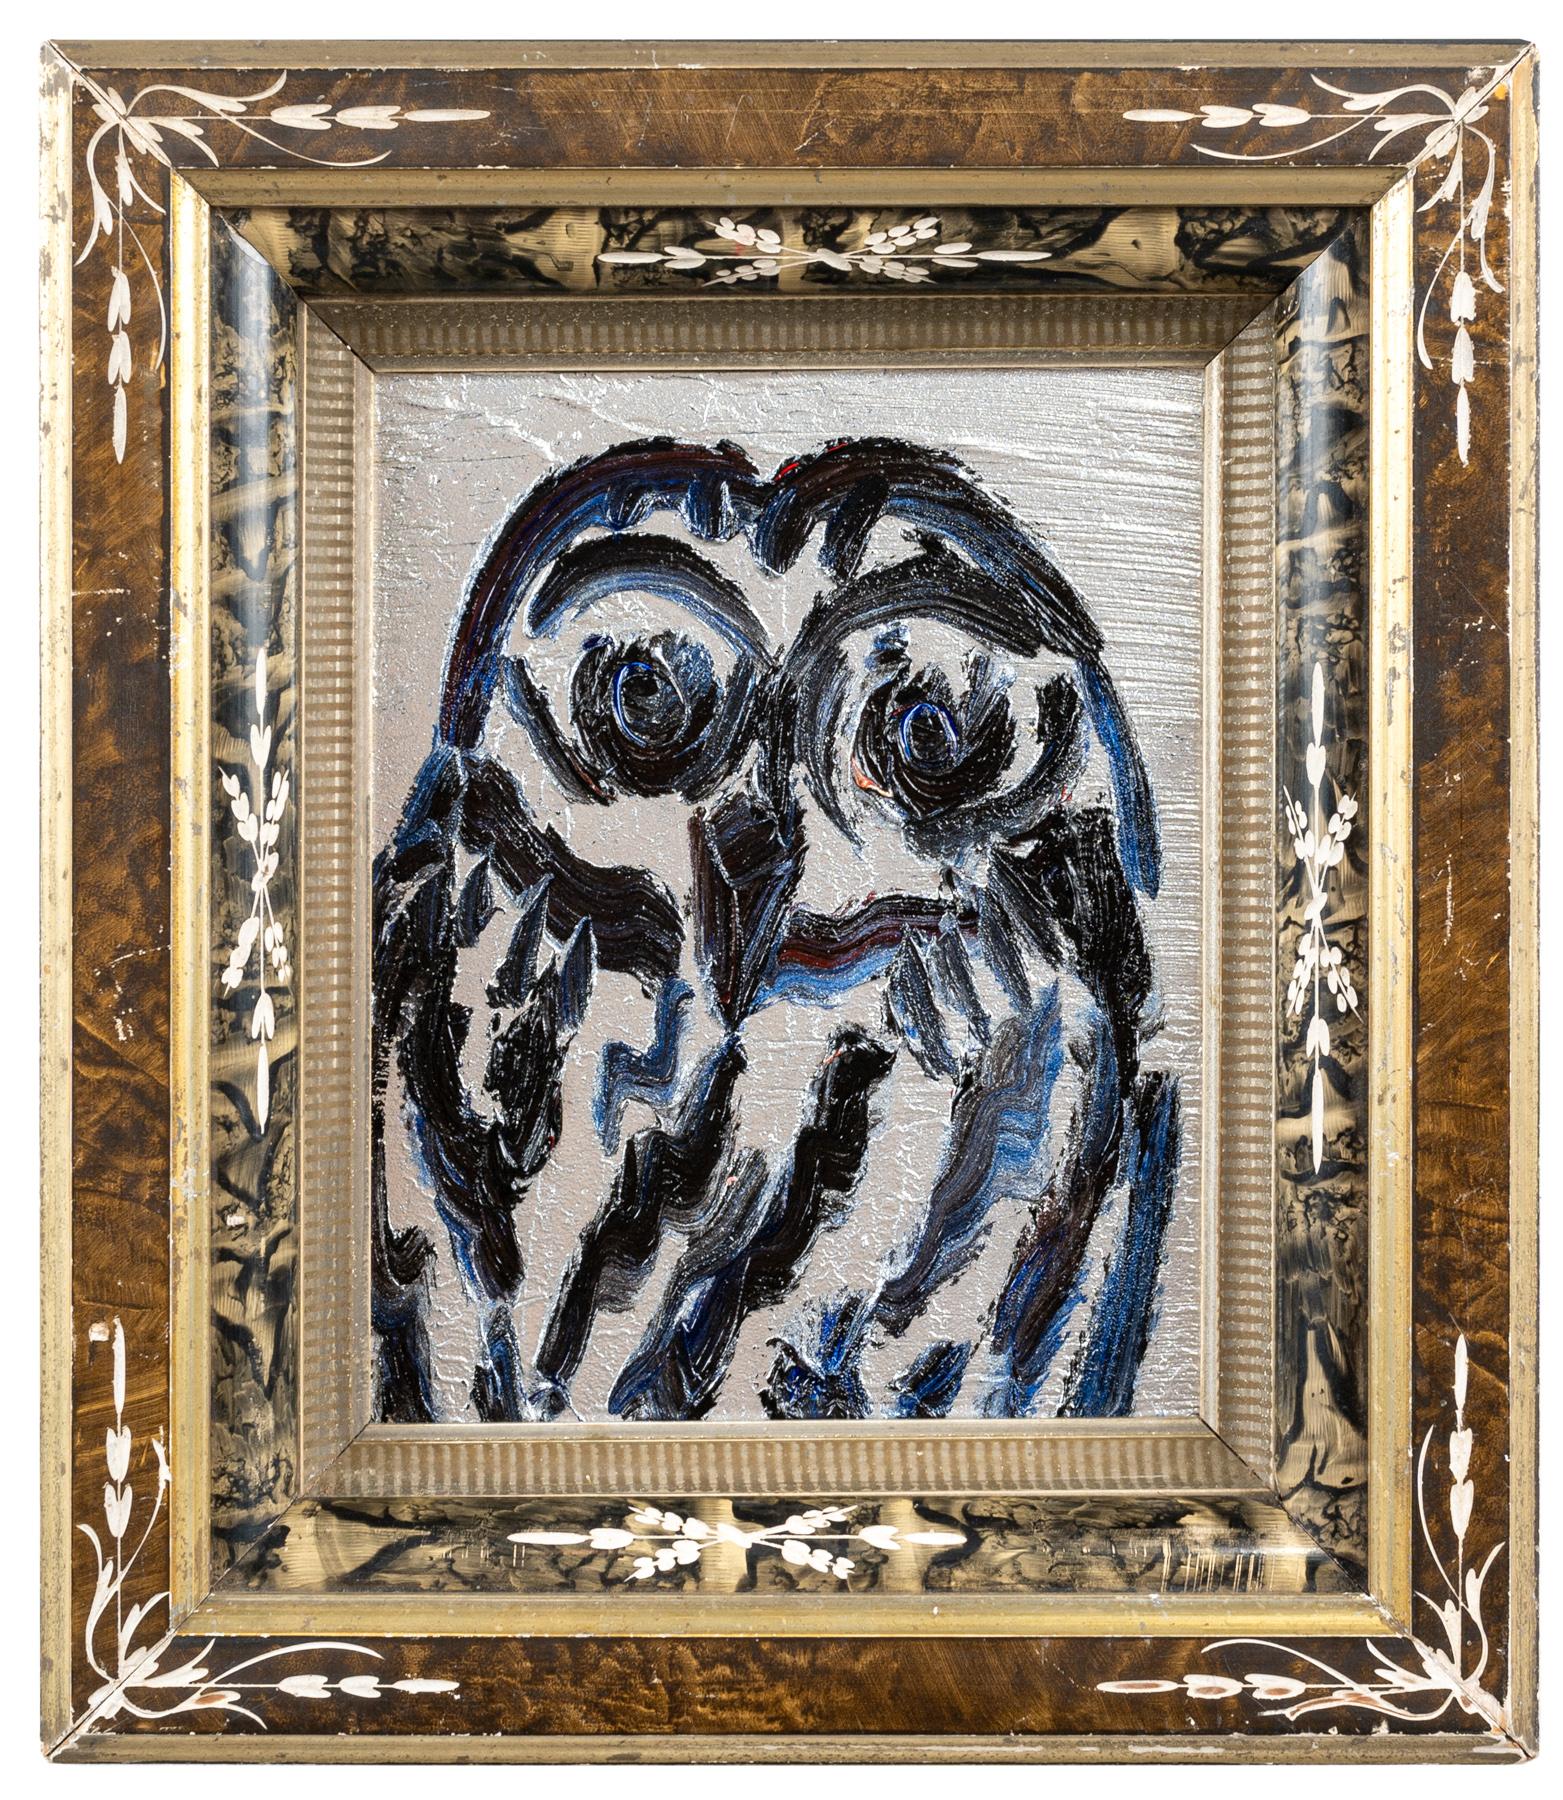 Hoot 3 1/2 - Painting by Hunt Slonem